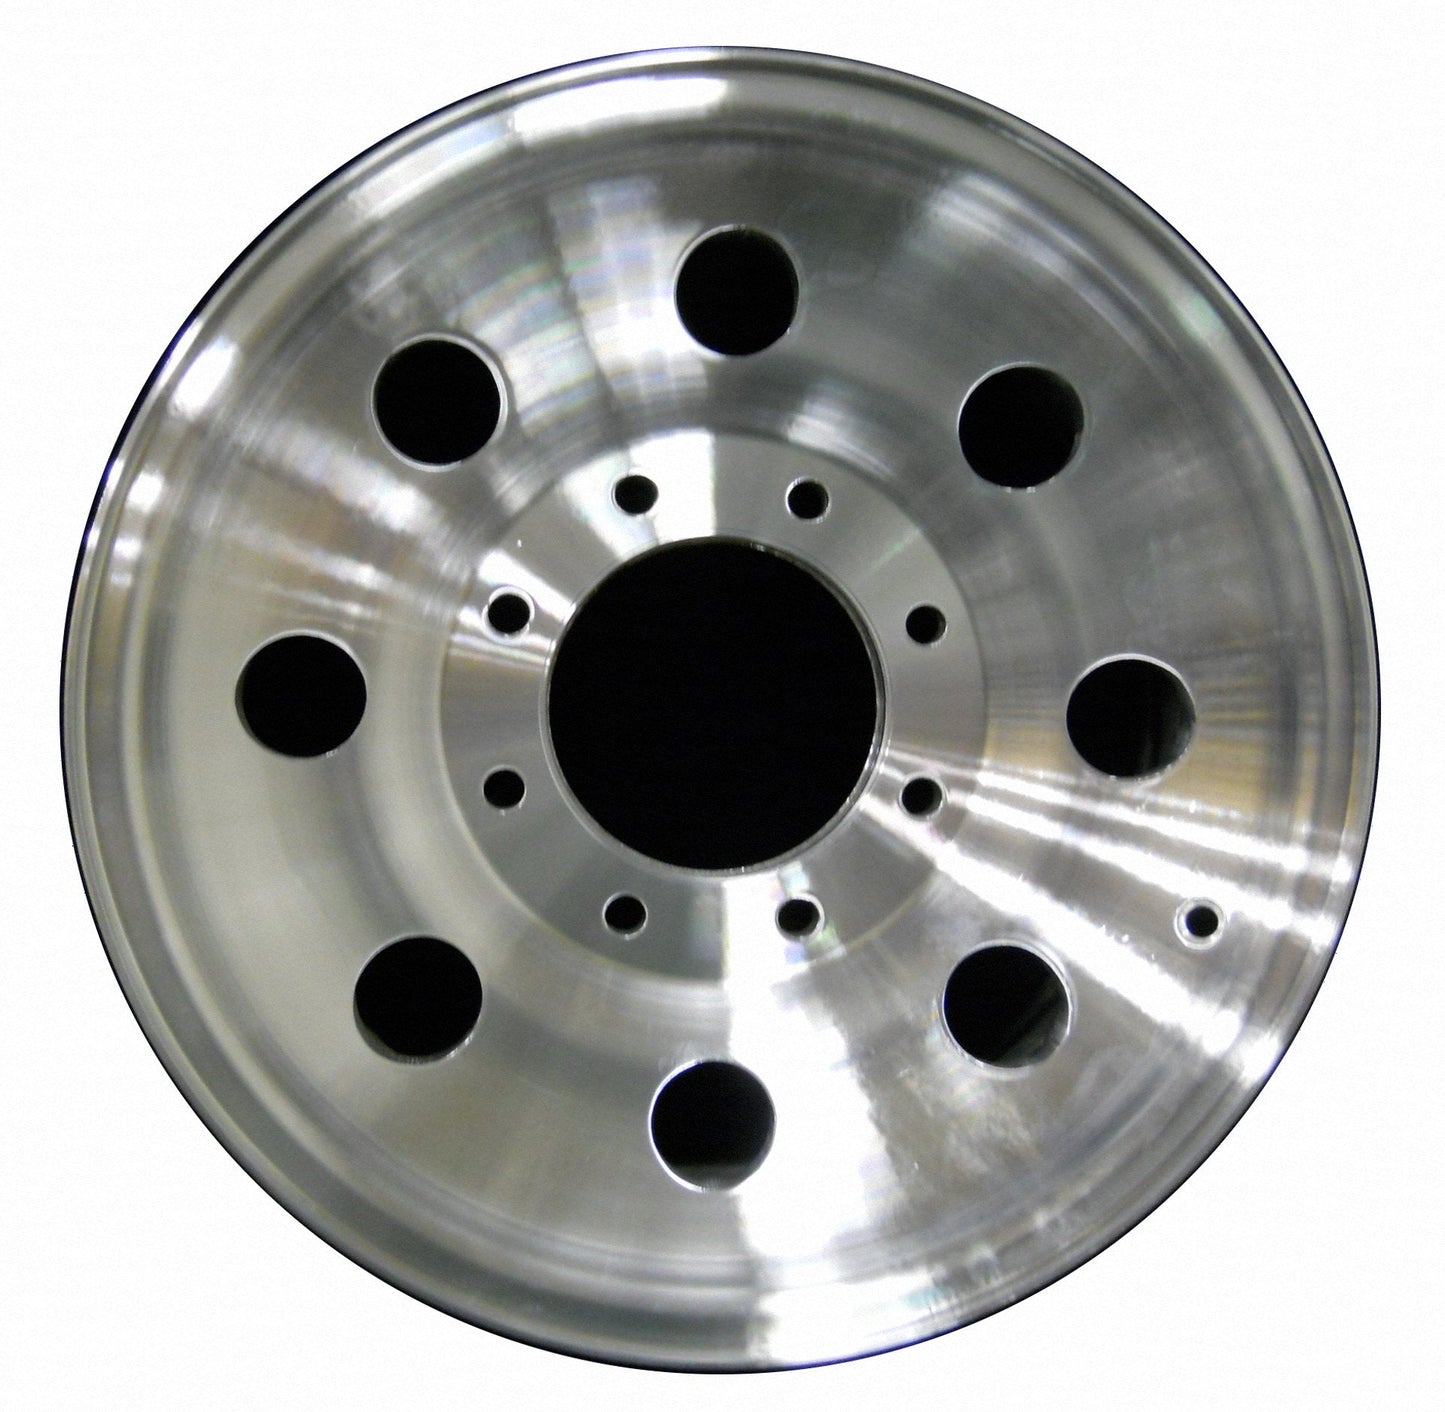 Ford Excursion  2000, 2001, 2002, 2003, 2004, 2005 Factory OEM Car Wheel Size 16x7 Alloy WAO.3338.AC.MA